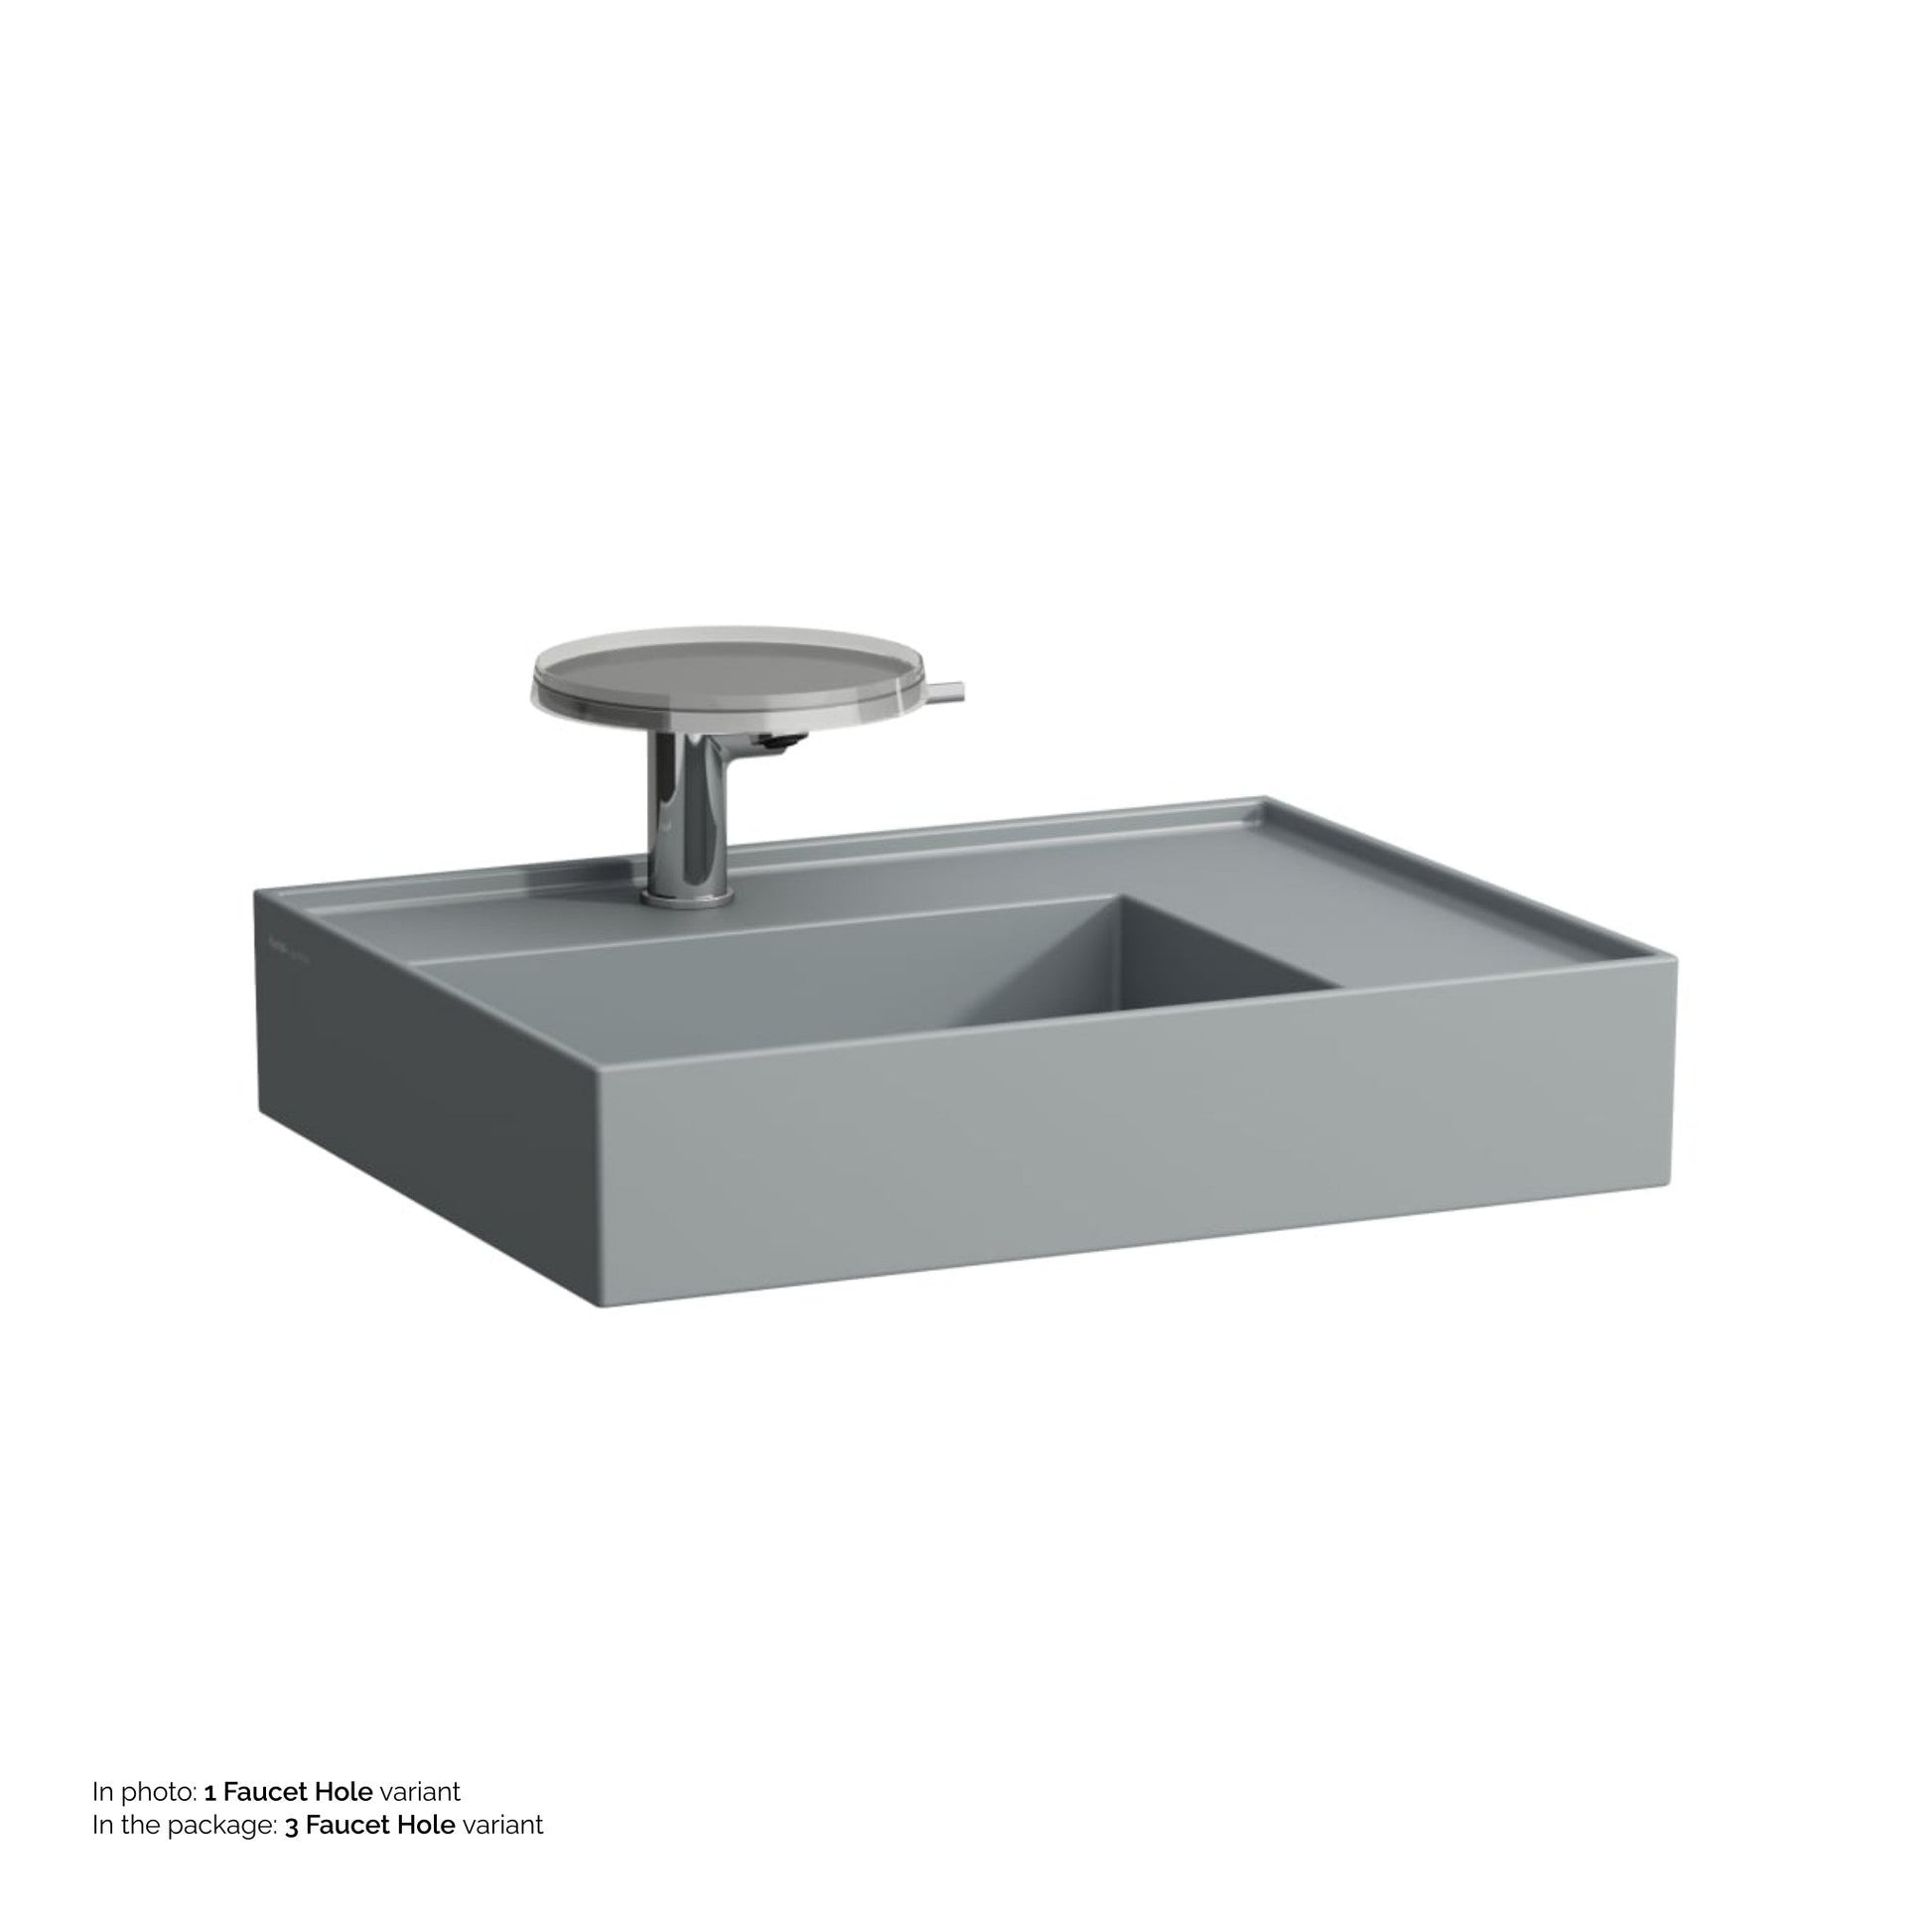 Laufen Kartell 24" x 18" Matte Graphite Countertop Shelf-Right Bathroom Sink With 3 Faucet Holes